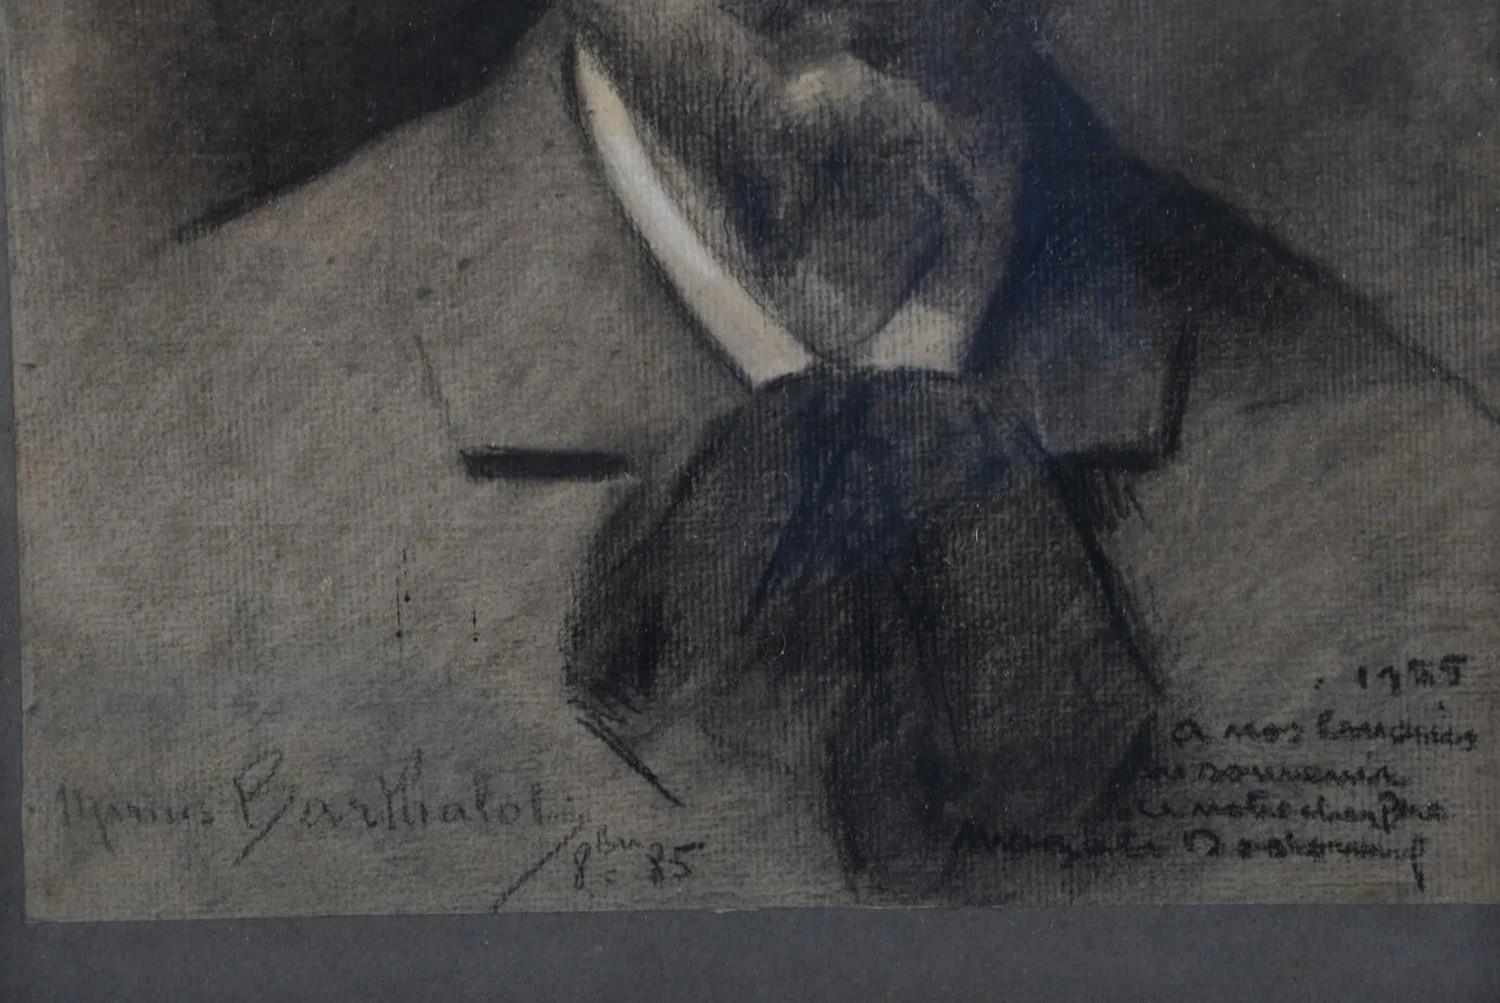 Marius Barthalot (1861-1955) A Self-portrait of the artist, 1885, signed drawing 2